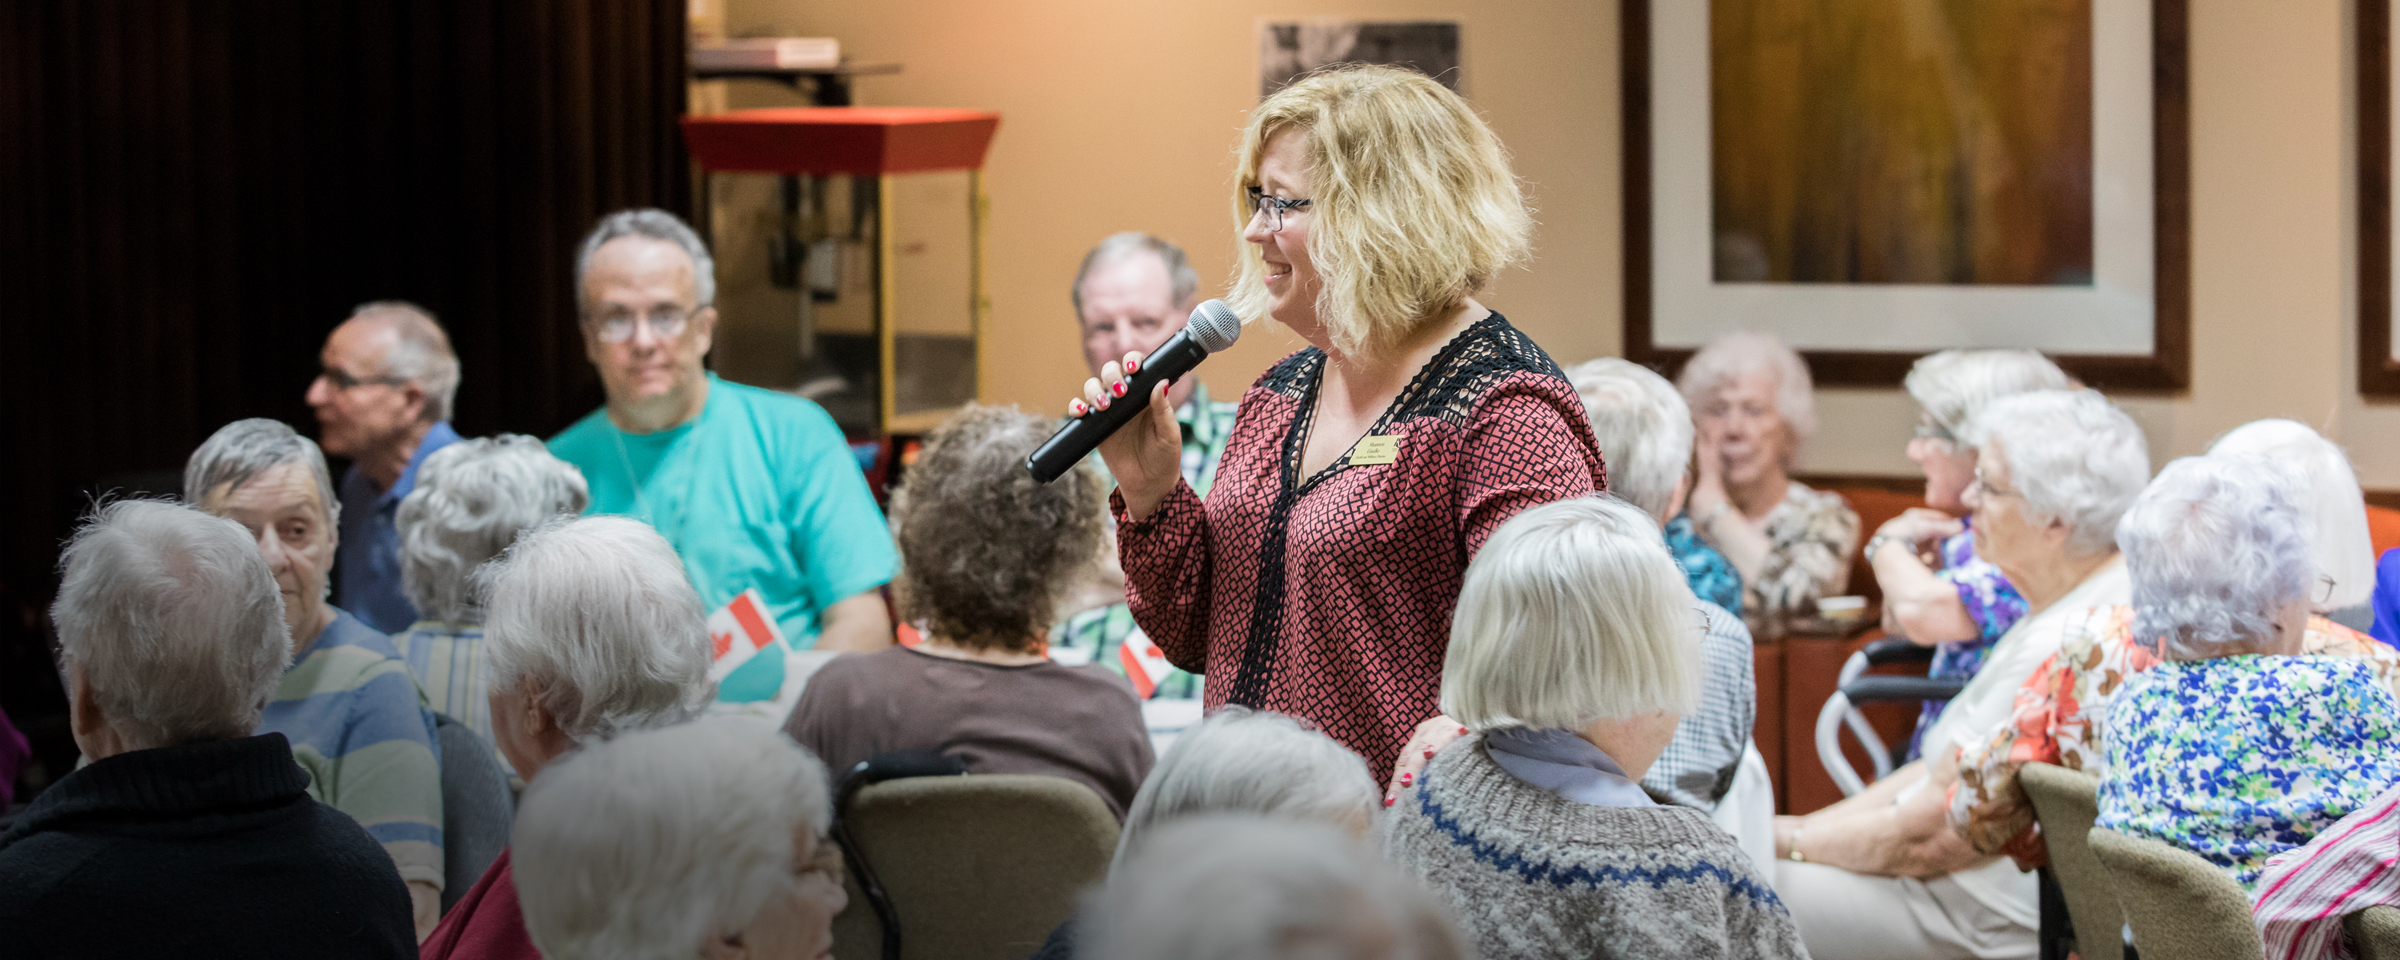 Woman standing up and talking to a group of older adults in a care home setting